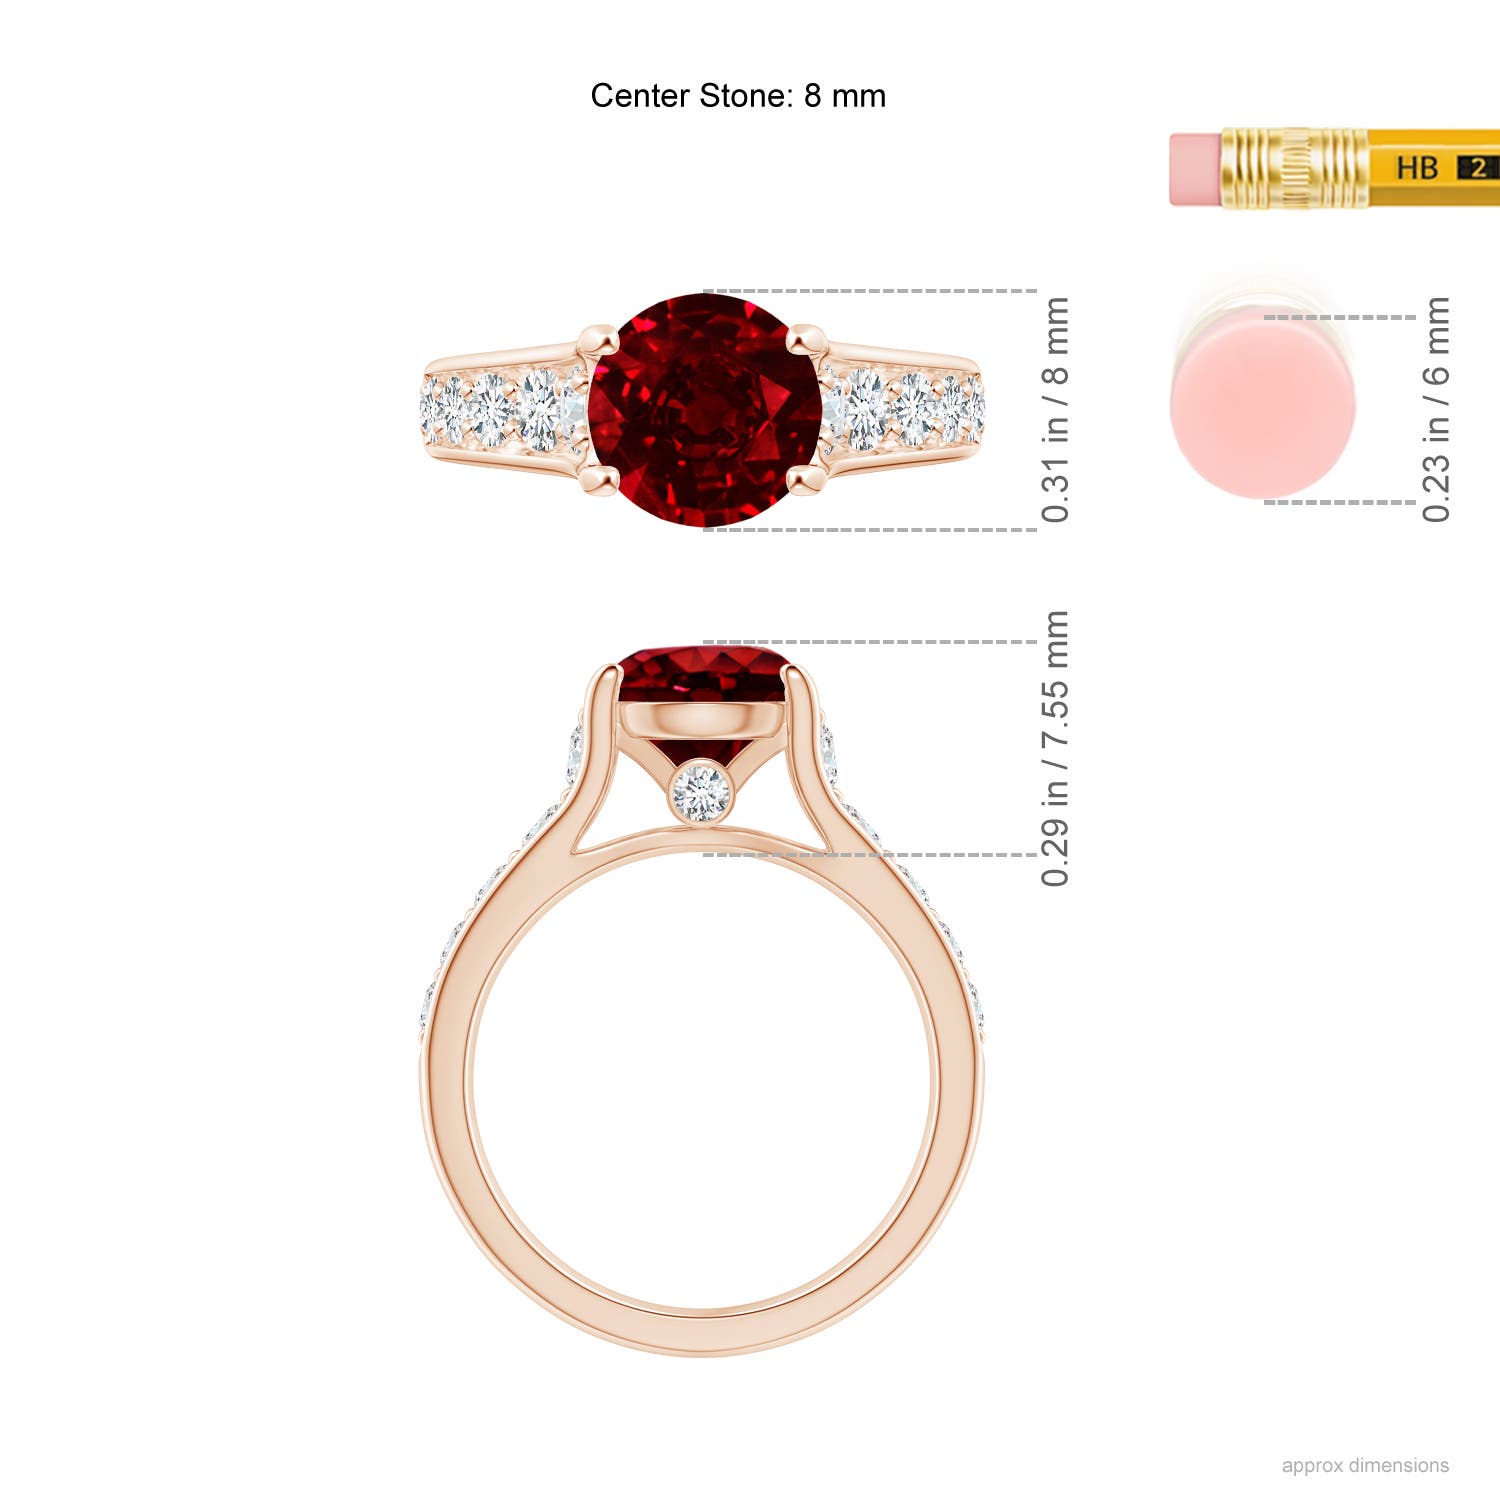 AAAA - Ruby / 2.8 CT / 14 KT Rose Gold